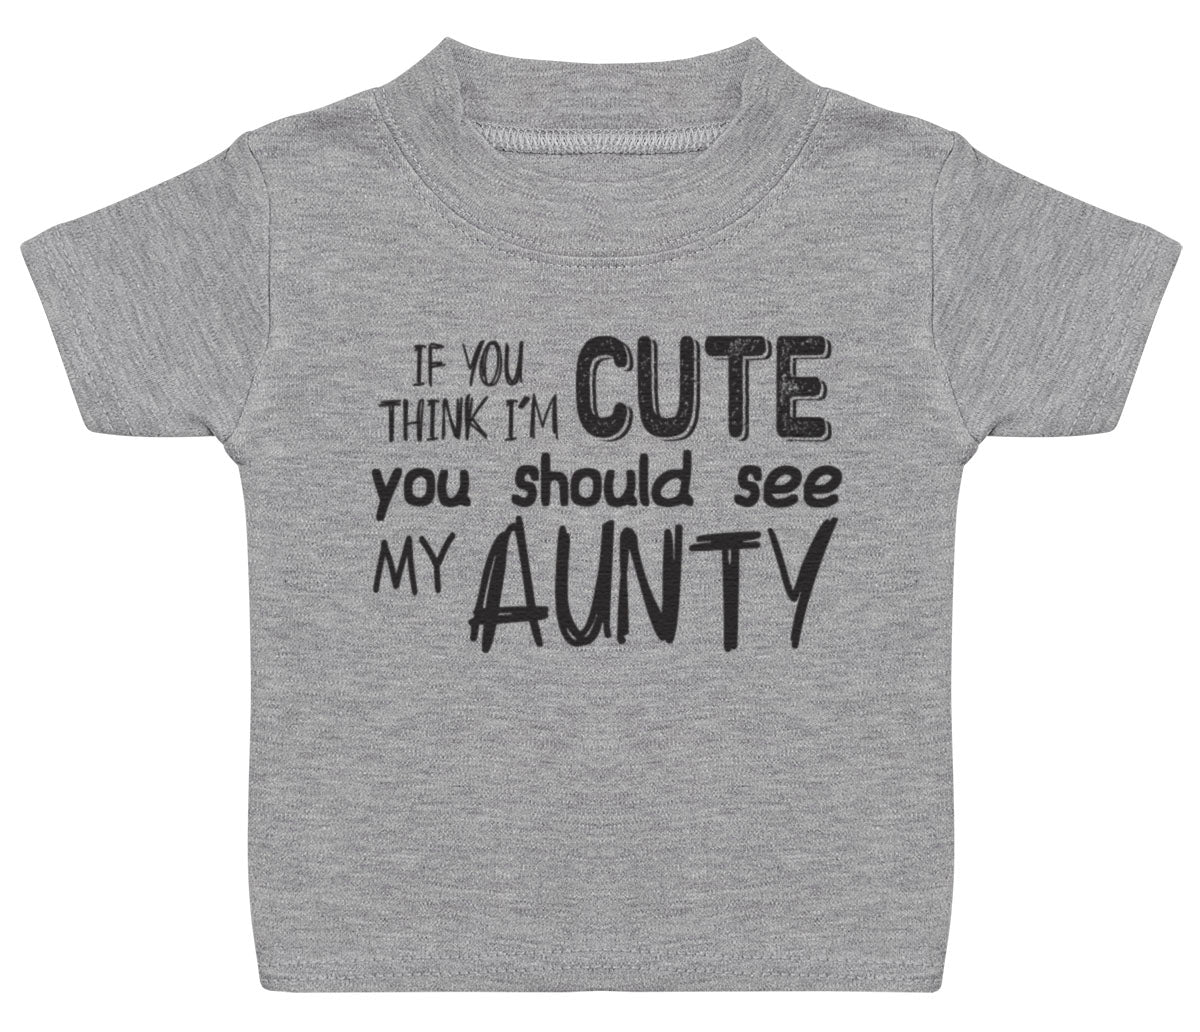 Pick A Family Name - If Think Cute Mummy, Auntie, Grandad and more - Baby & Kids T-Shirt